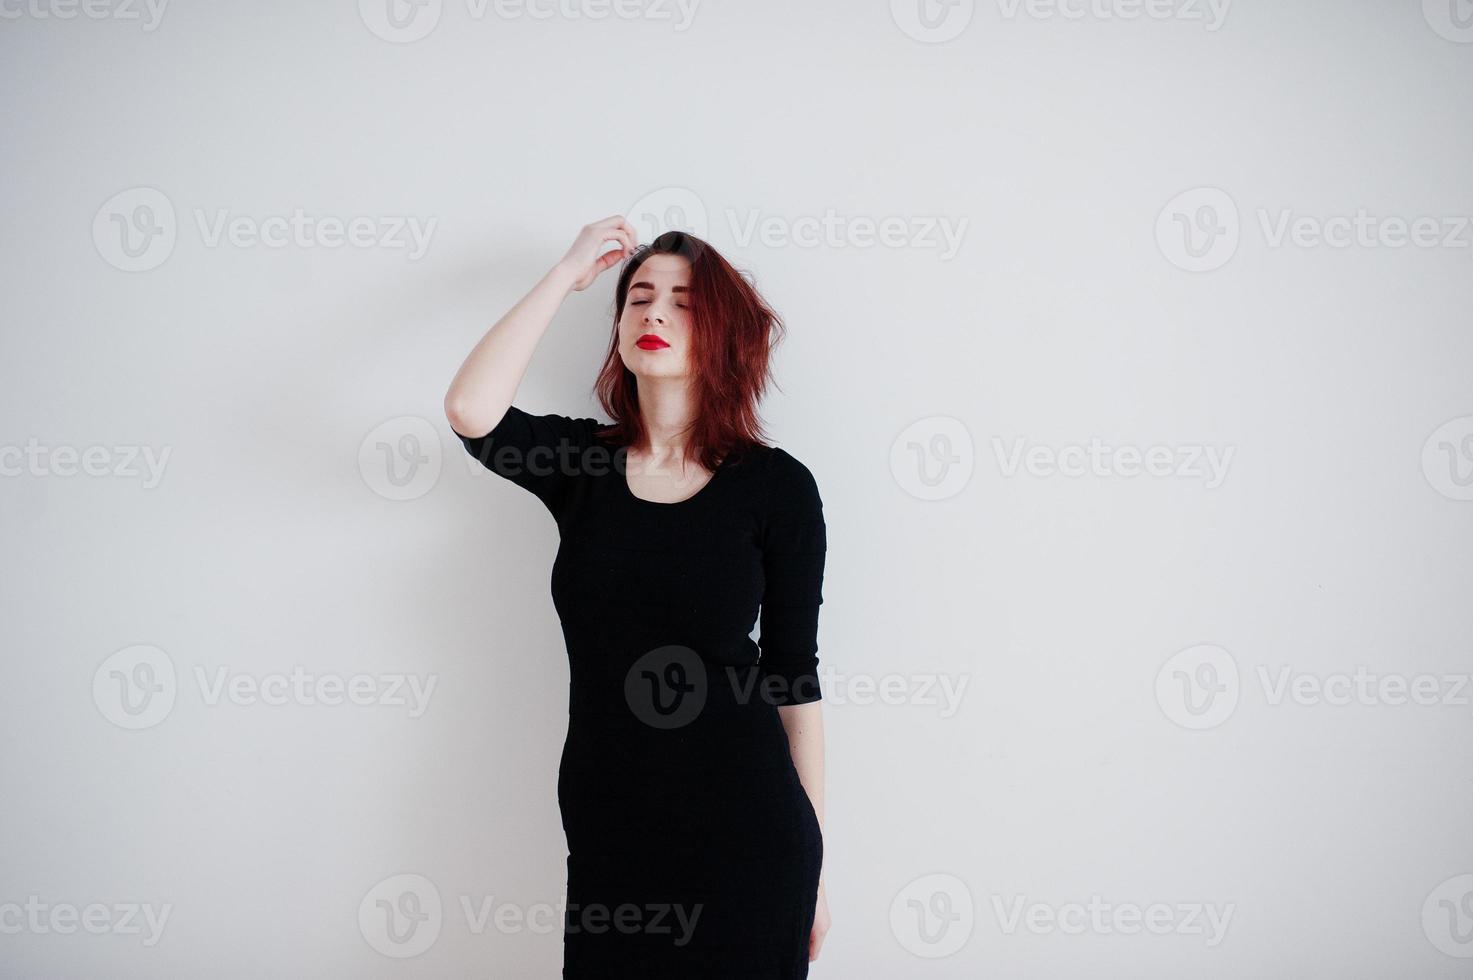 Red haired girl on black dress tunic against white wall at empty room. photo